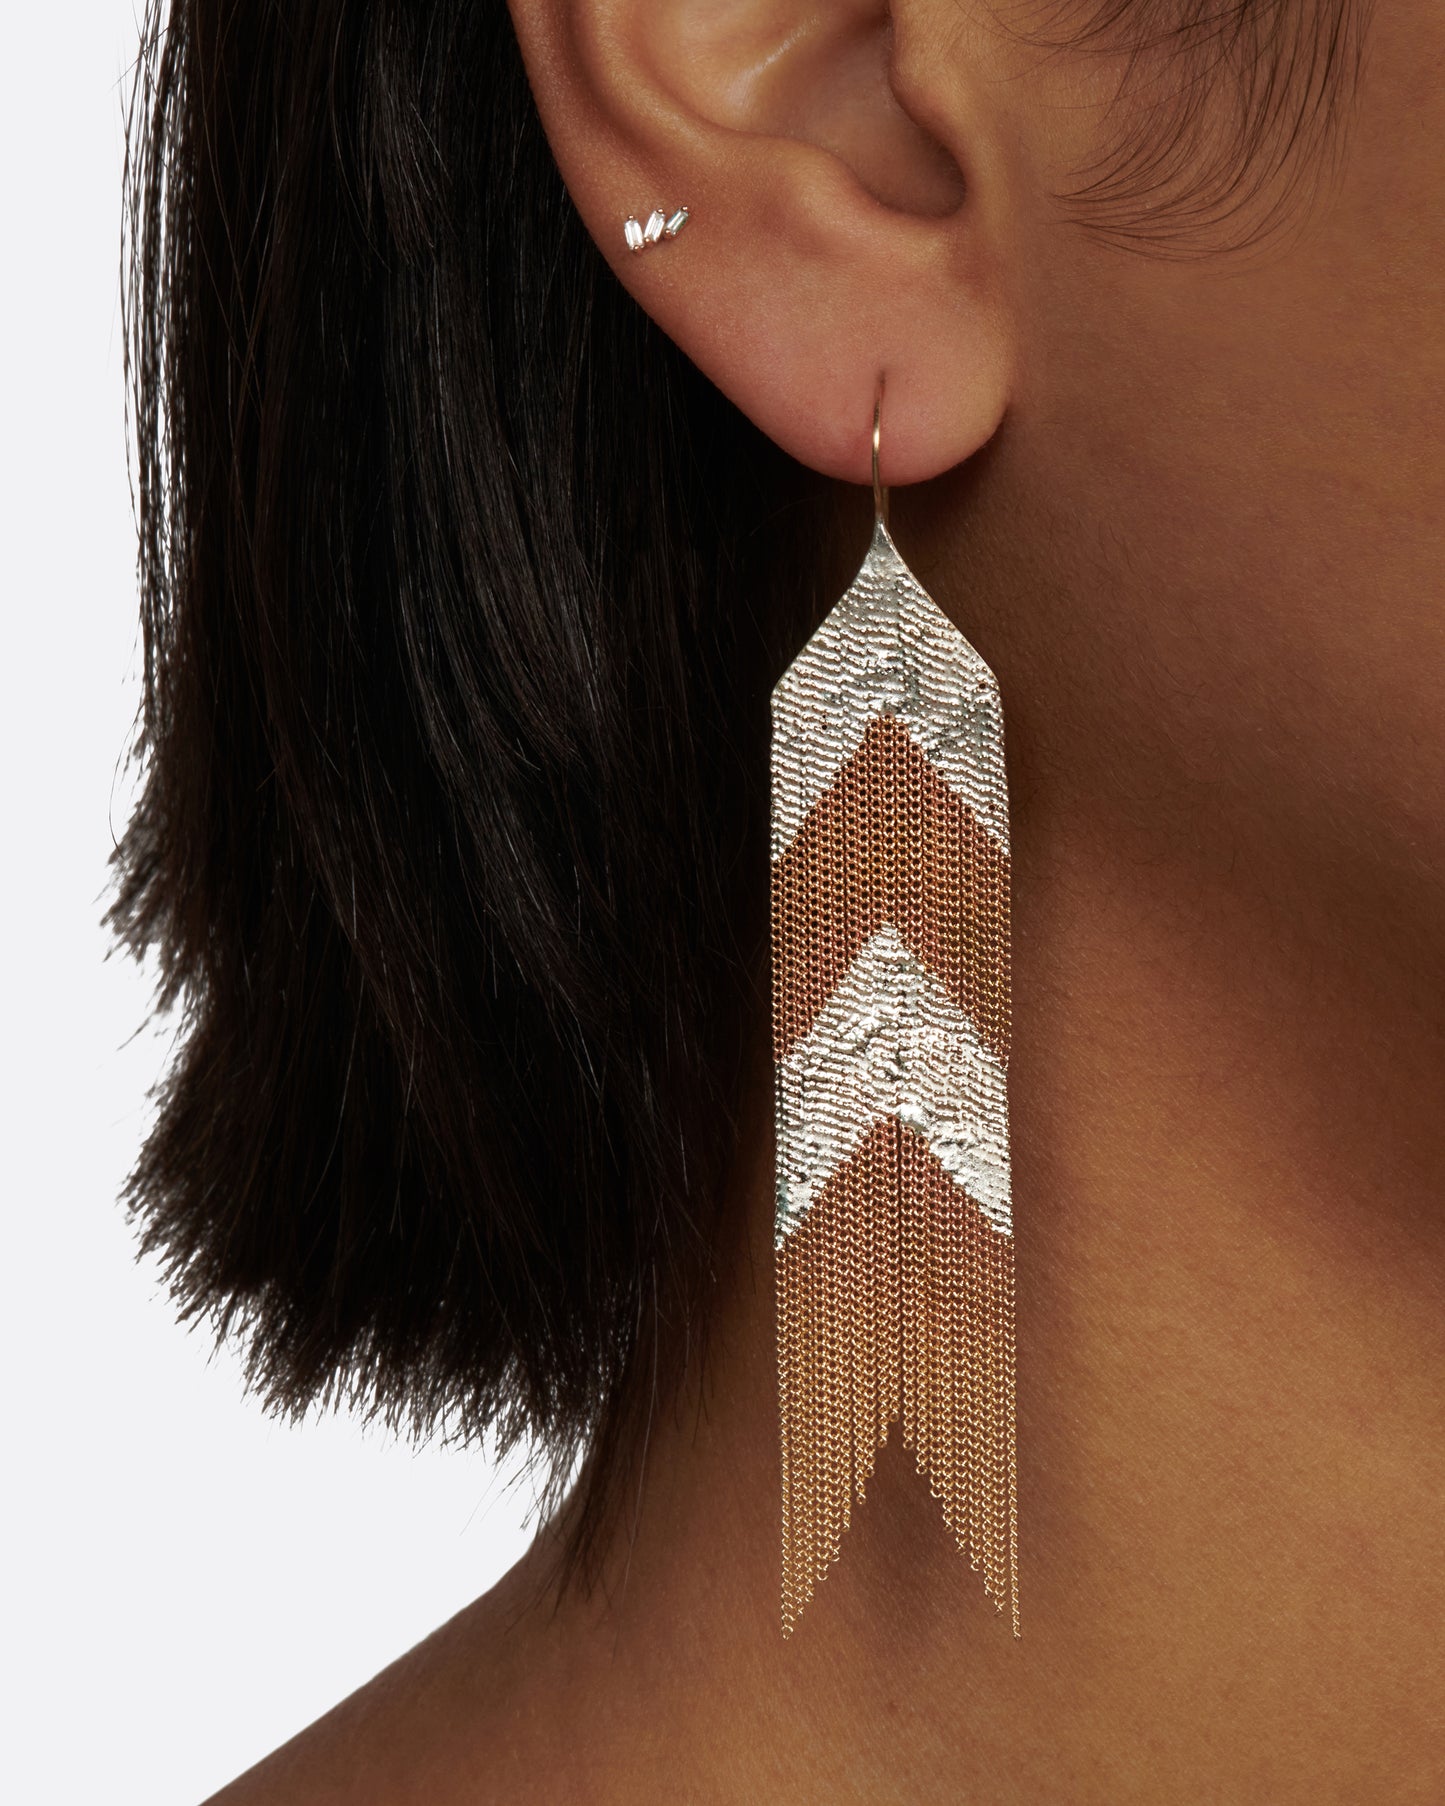 A pair of mixed metal chain fringe earrings in the shape of an arrow.